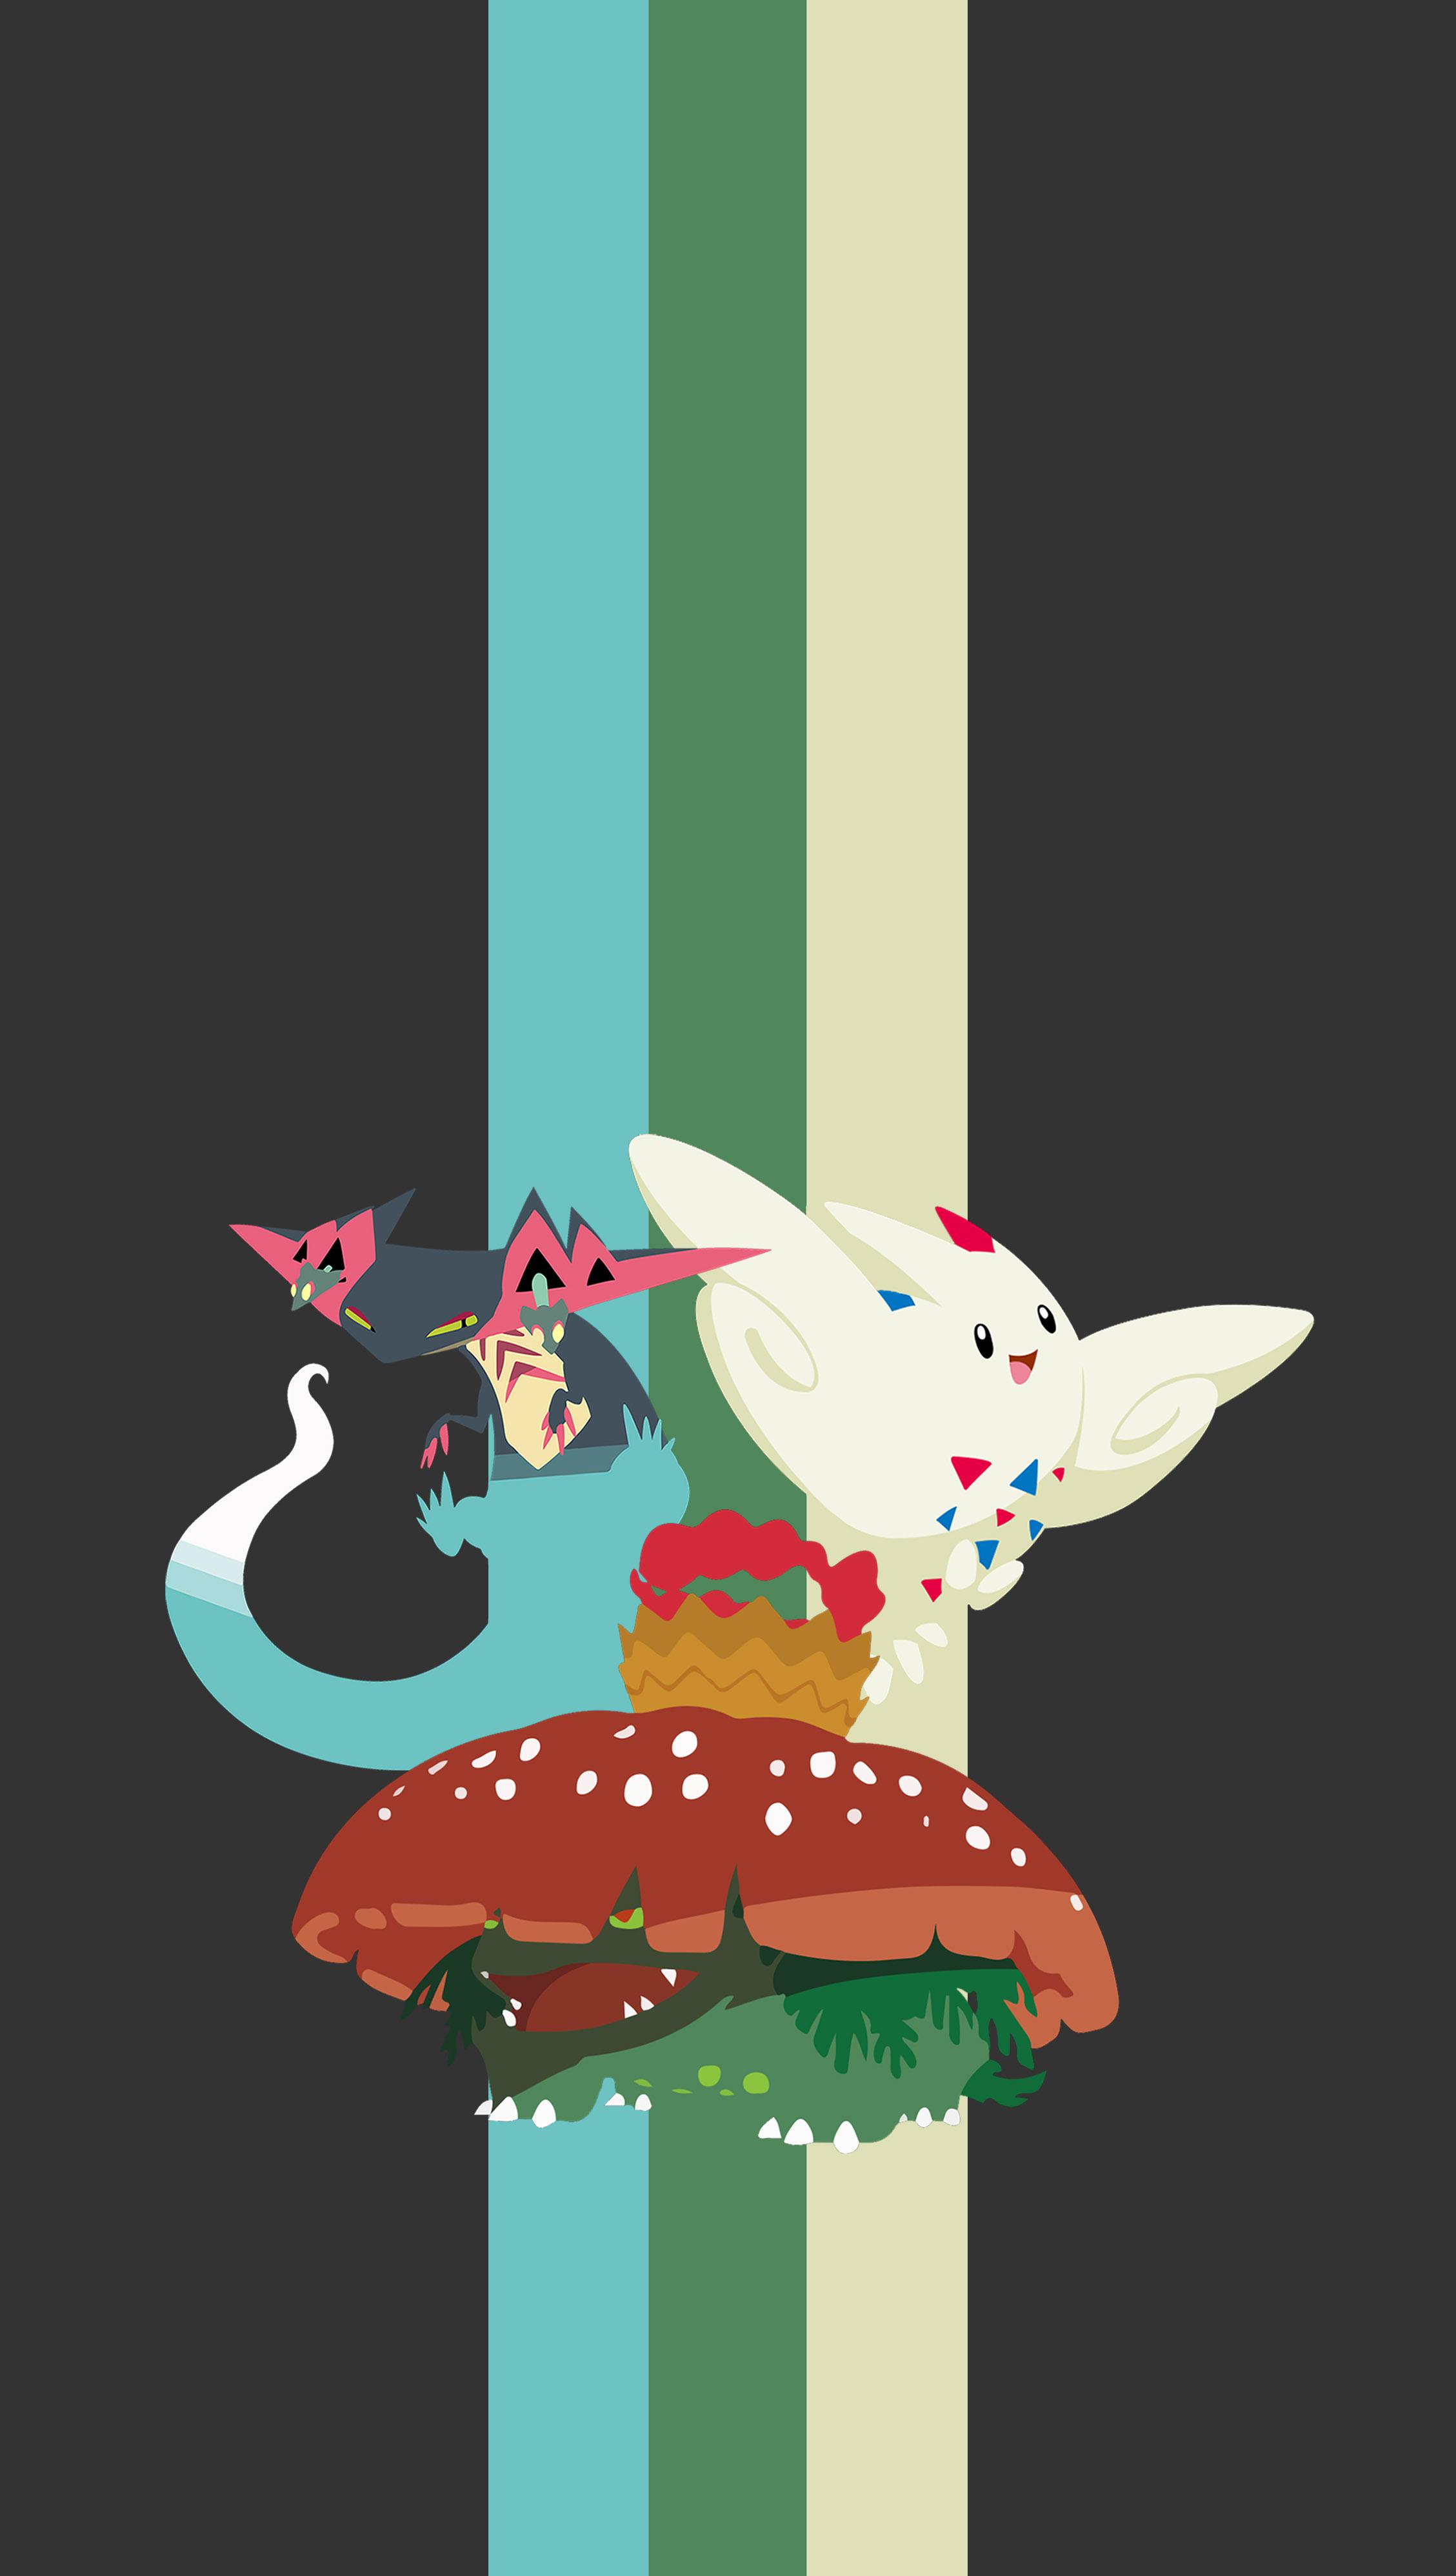 OC Pokemon minimalist iphone wallpaper, ft. Togekiss, Dragupult and Gmax Venusaur. If you have a look on my profile you'll see some I have allready done. I am looking for suggestions for